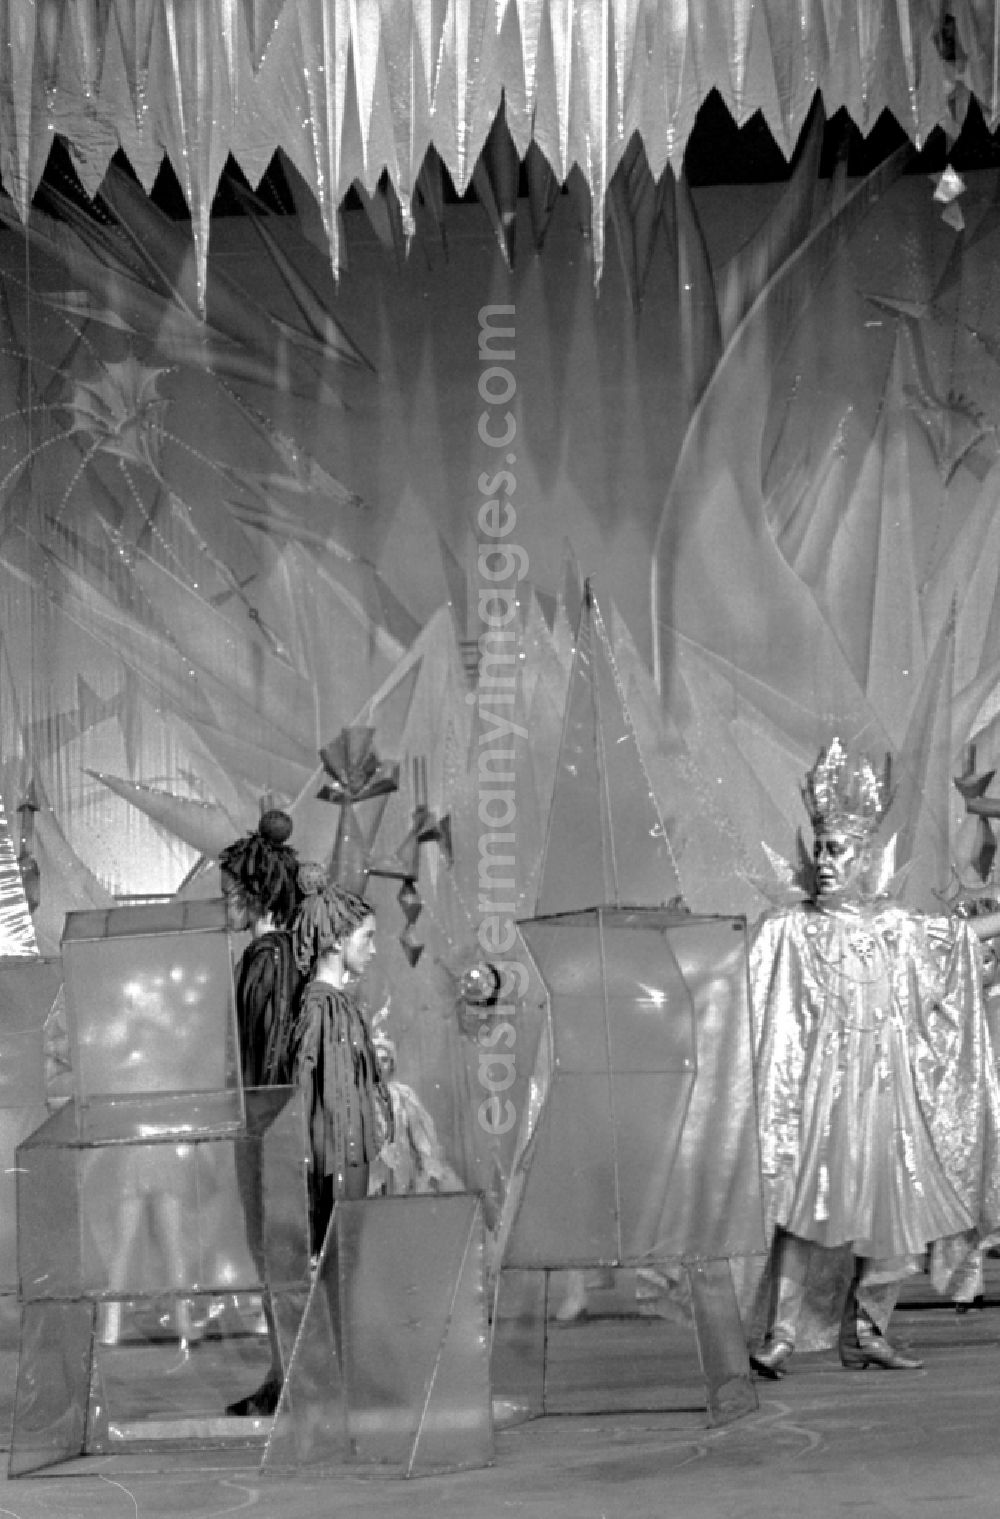 GDR picture archive: Berlin - Actors and actors of a theater - scene and stage design Kinderrevue Regenbogen im Friedrichstadtpalast in the district Mitte in Berlin Eastberlin on the territory of the former GDR, German Democratic Republic